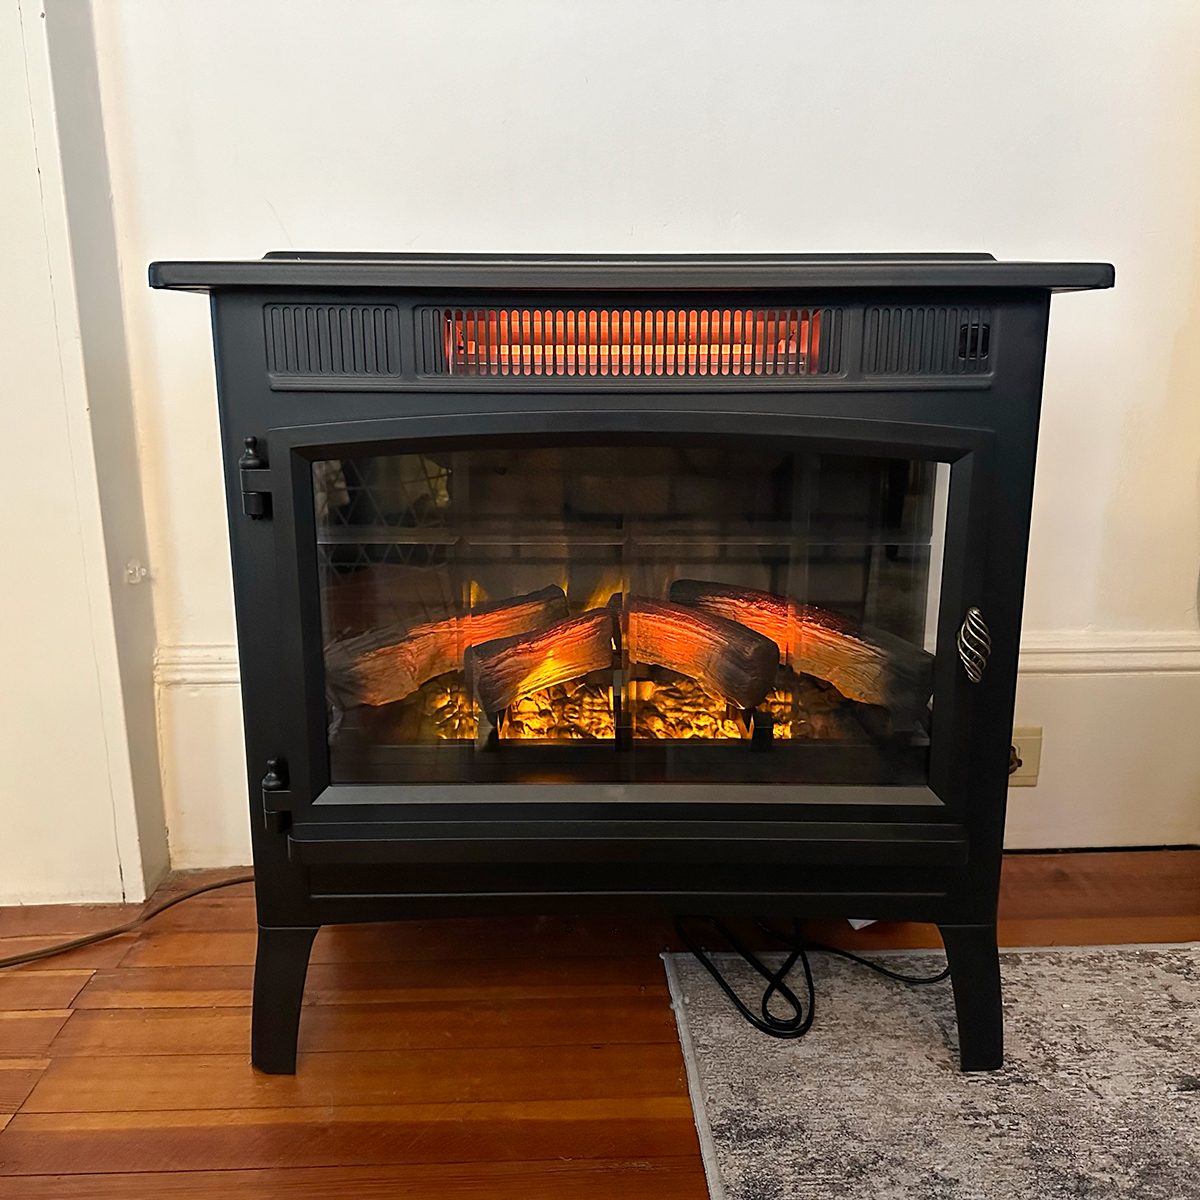 Fhma24 Duraflame Electric Fireplace Stephanie Hope 01 Ssedit